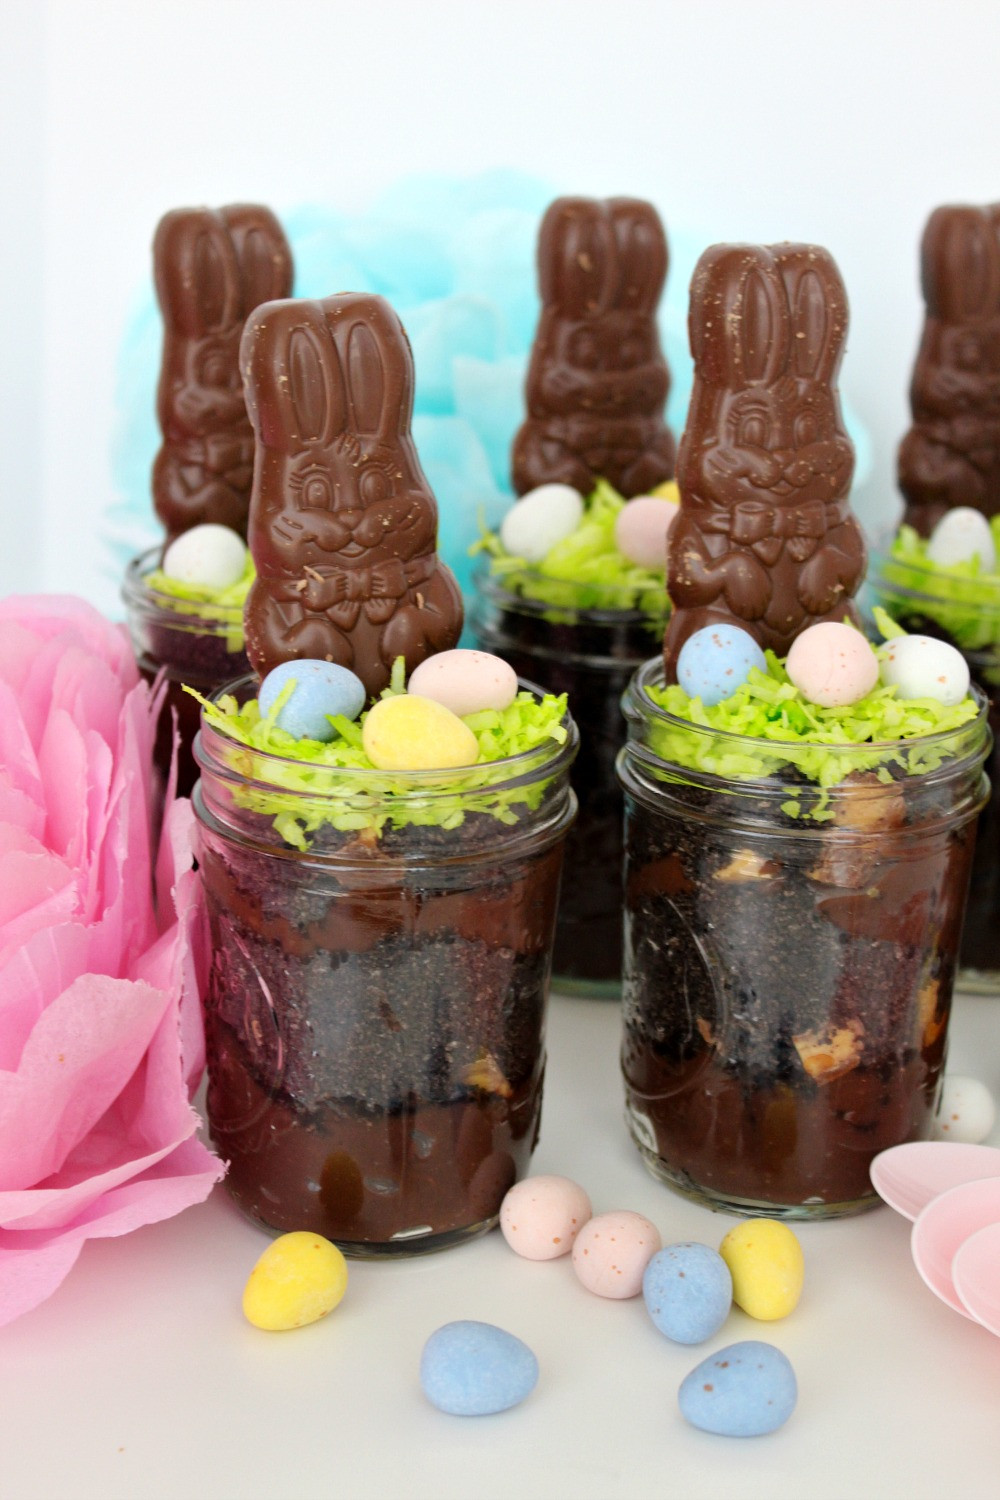 Easy Desserts For Easter
 An Easy & Delicious Easter Dessert Using Classic and New